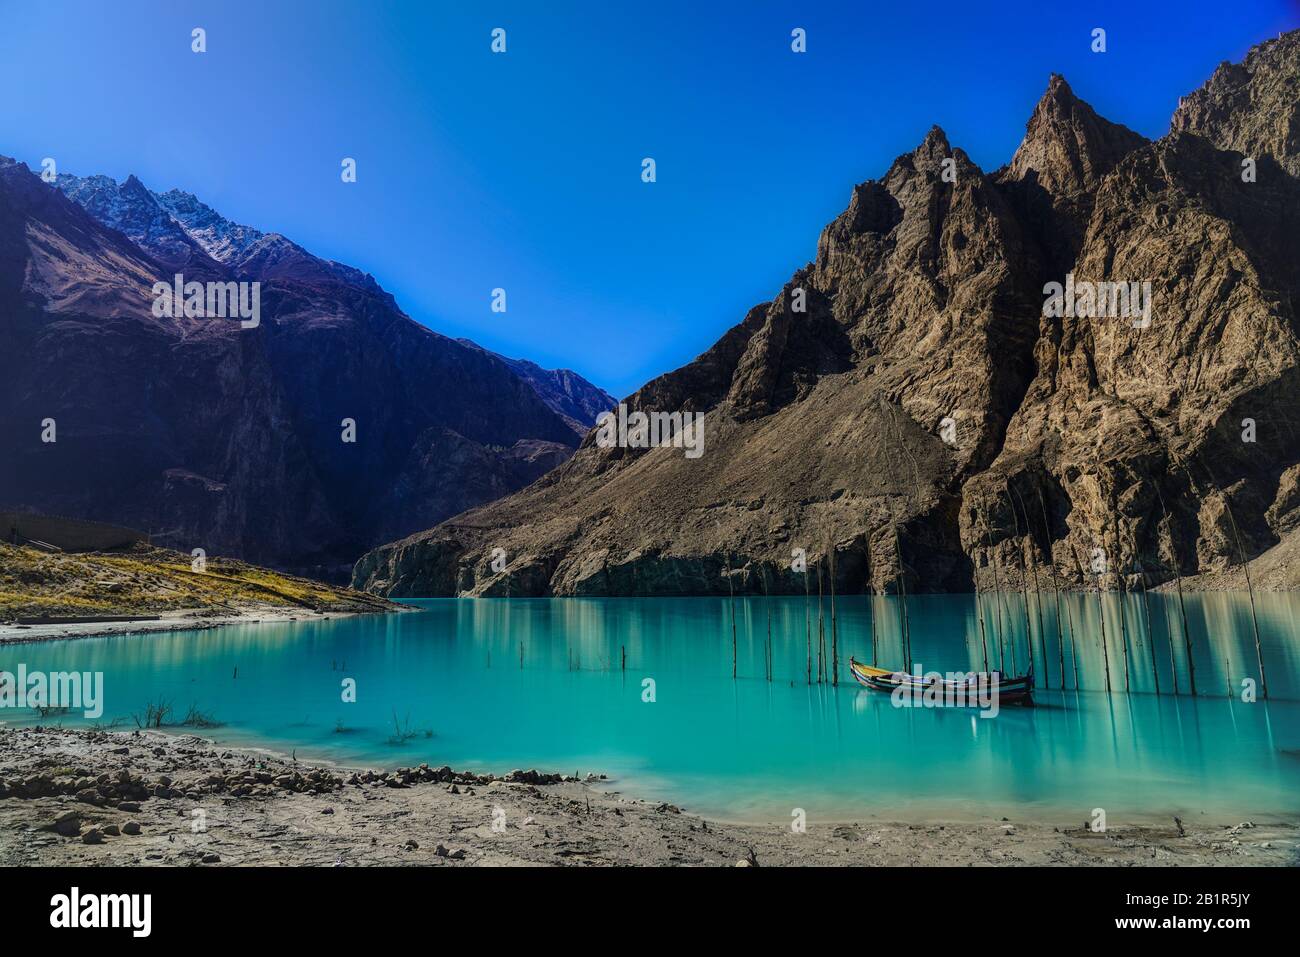 Attabad Lake, Gojal Valley, Hunza, Gilgit Baltistan, Pakistan formed after the 2010 Attabad Disaster and now a popular tourist attraction in a scenic Stock Photo